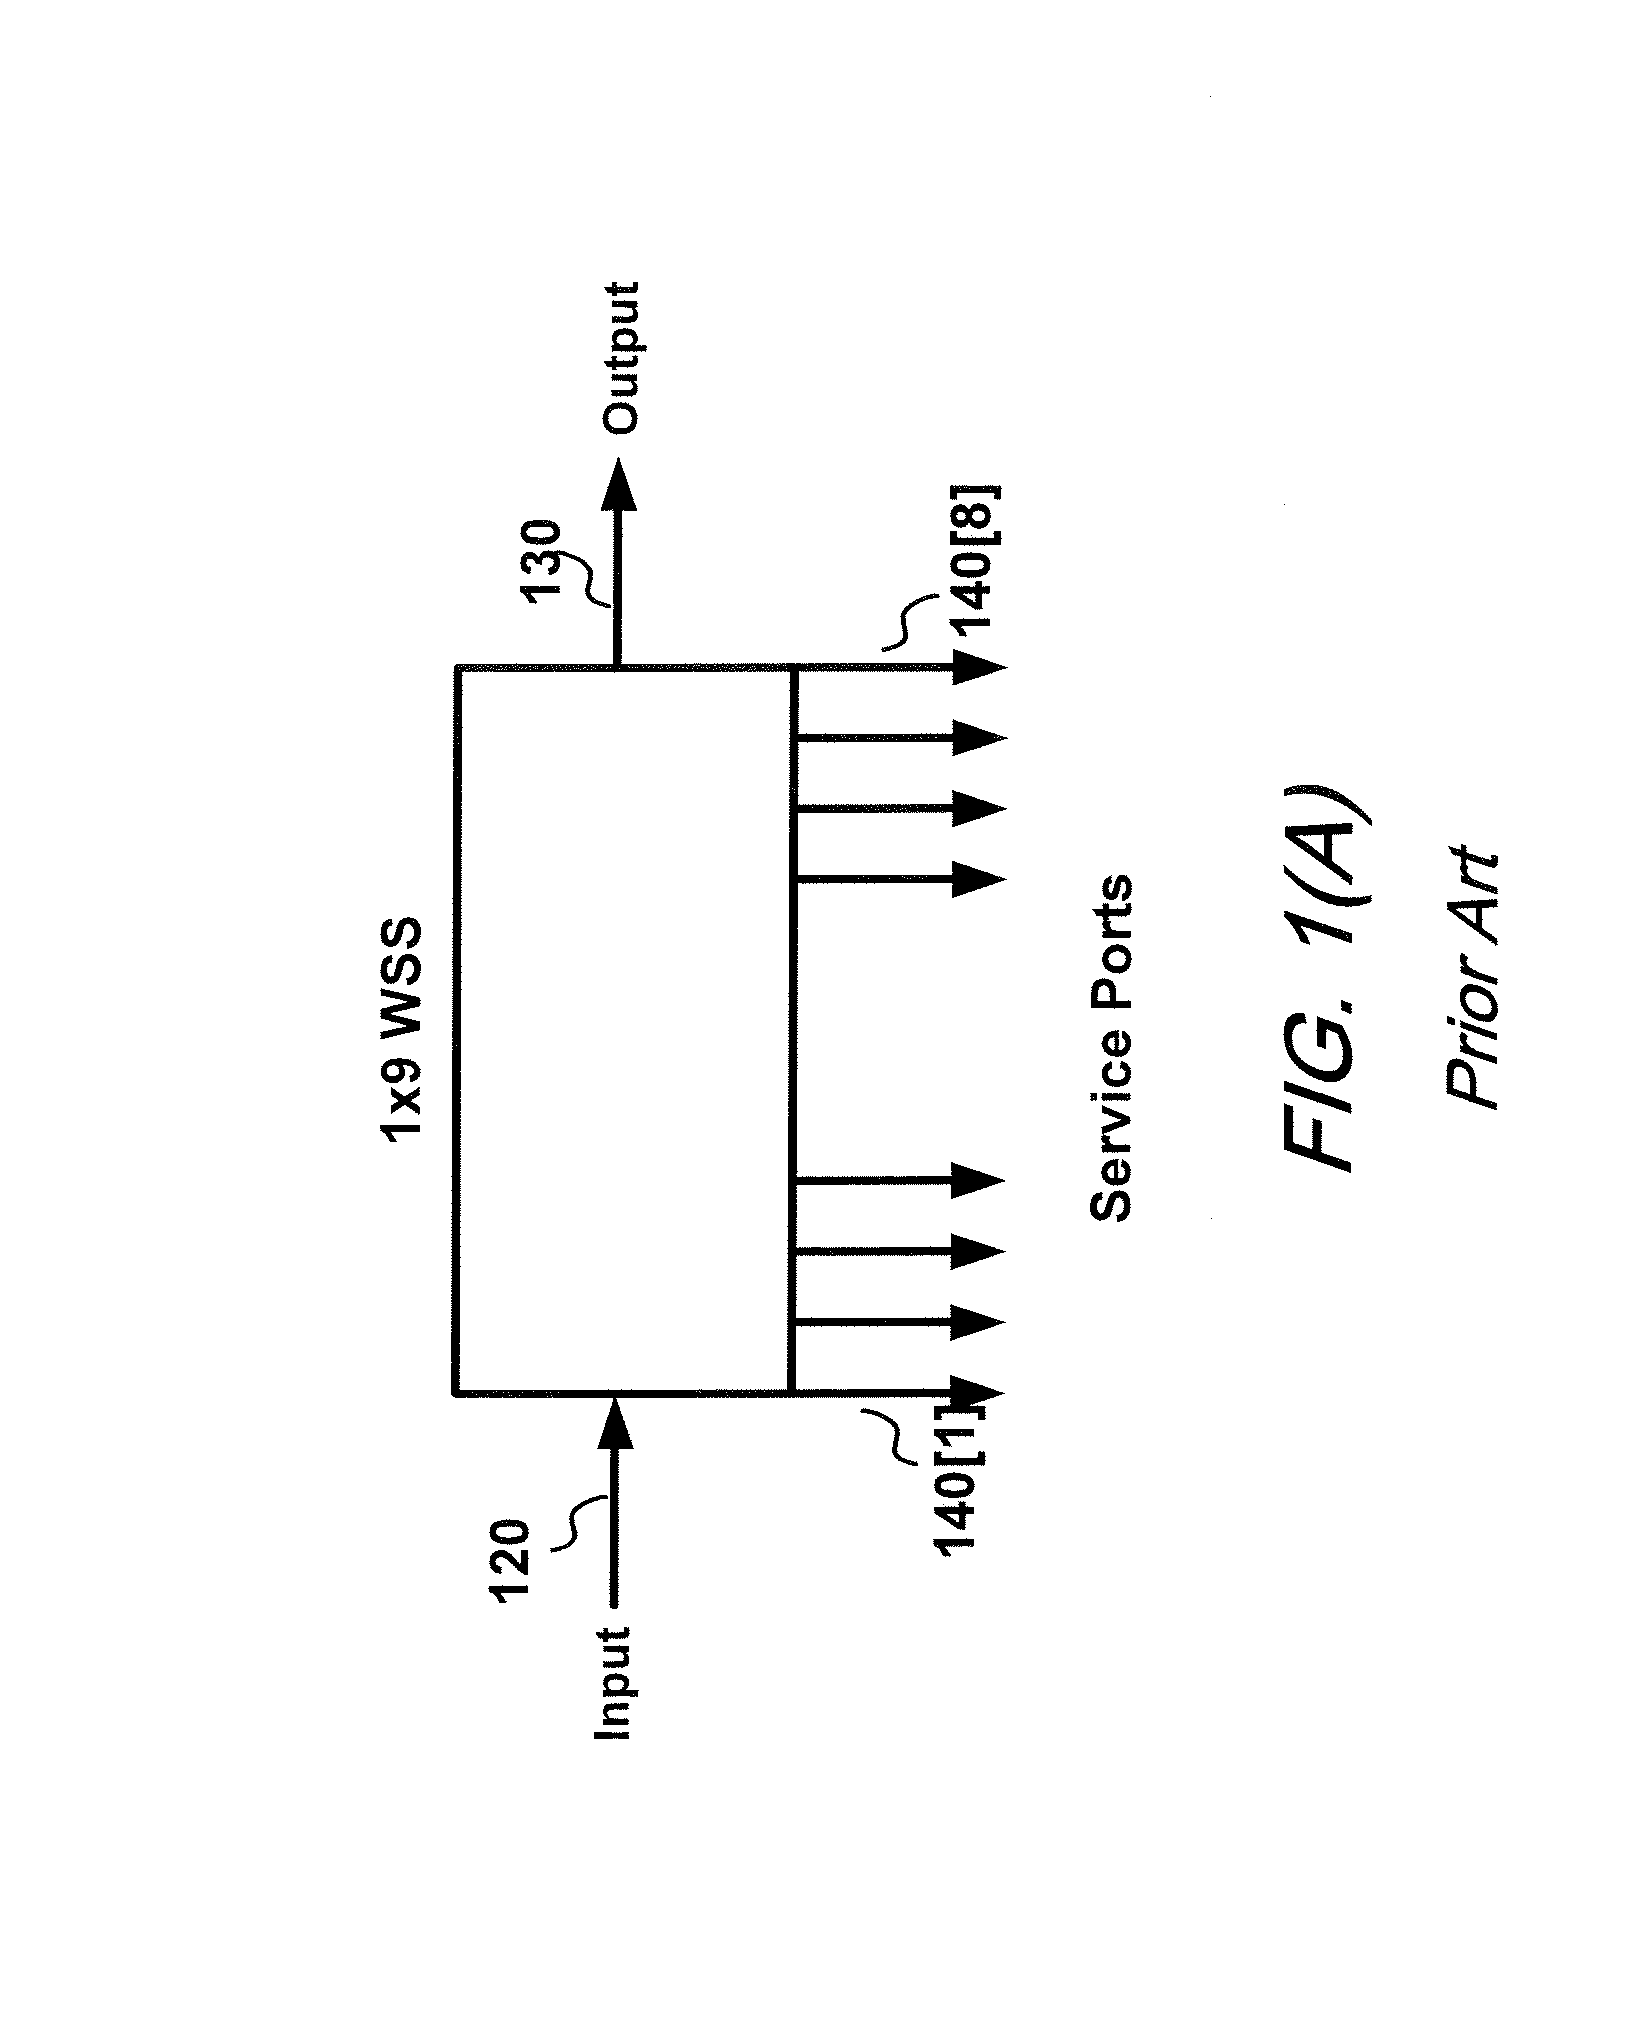 Centralized resource management in wavelength selective switch based wavelength cross connect systems